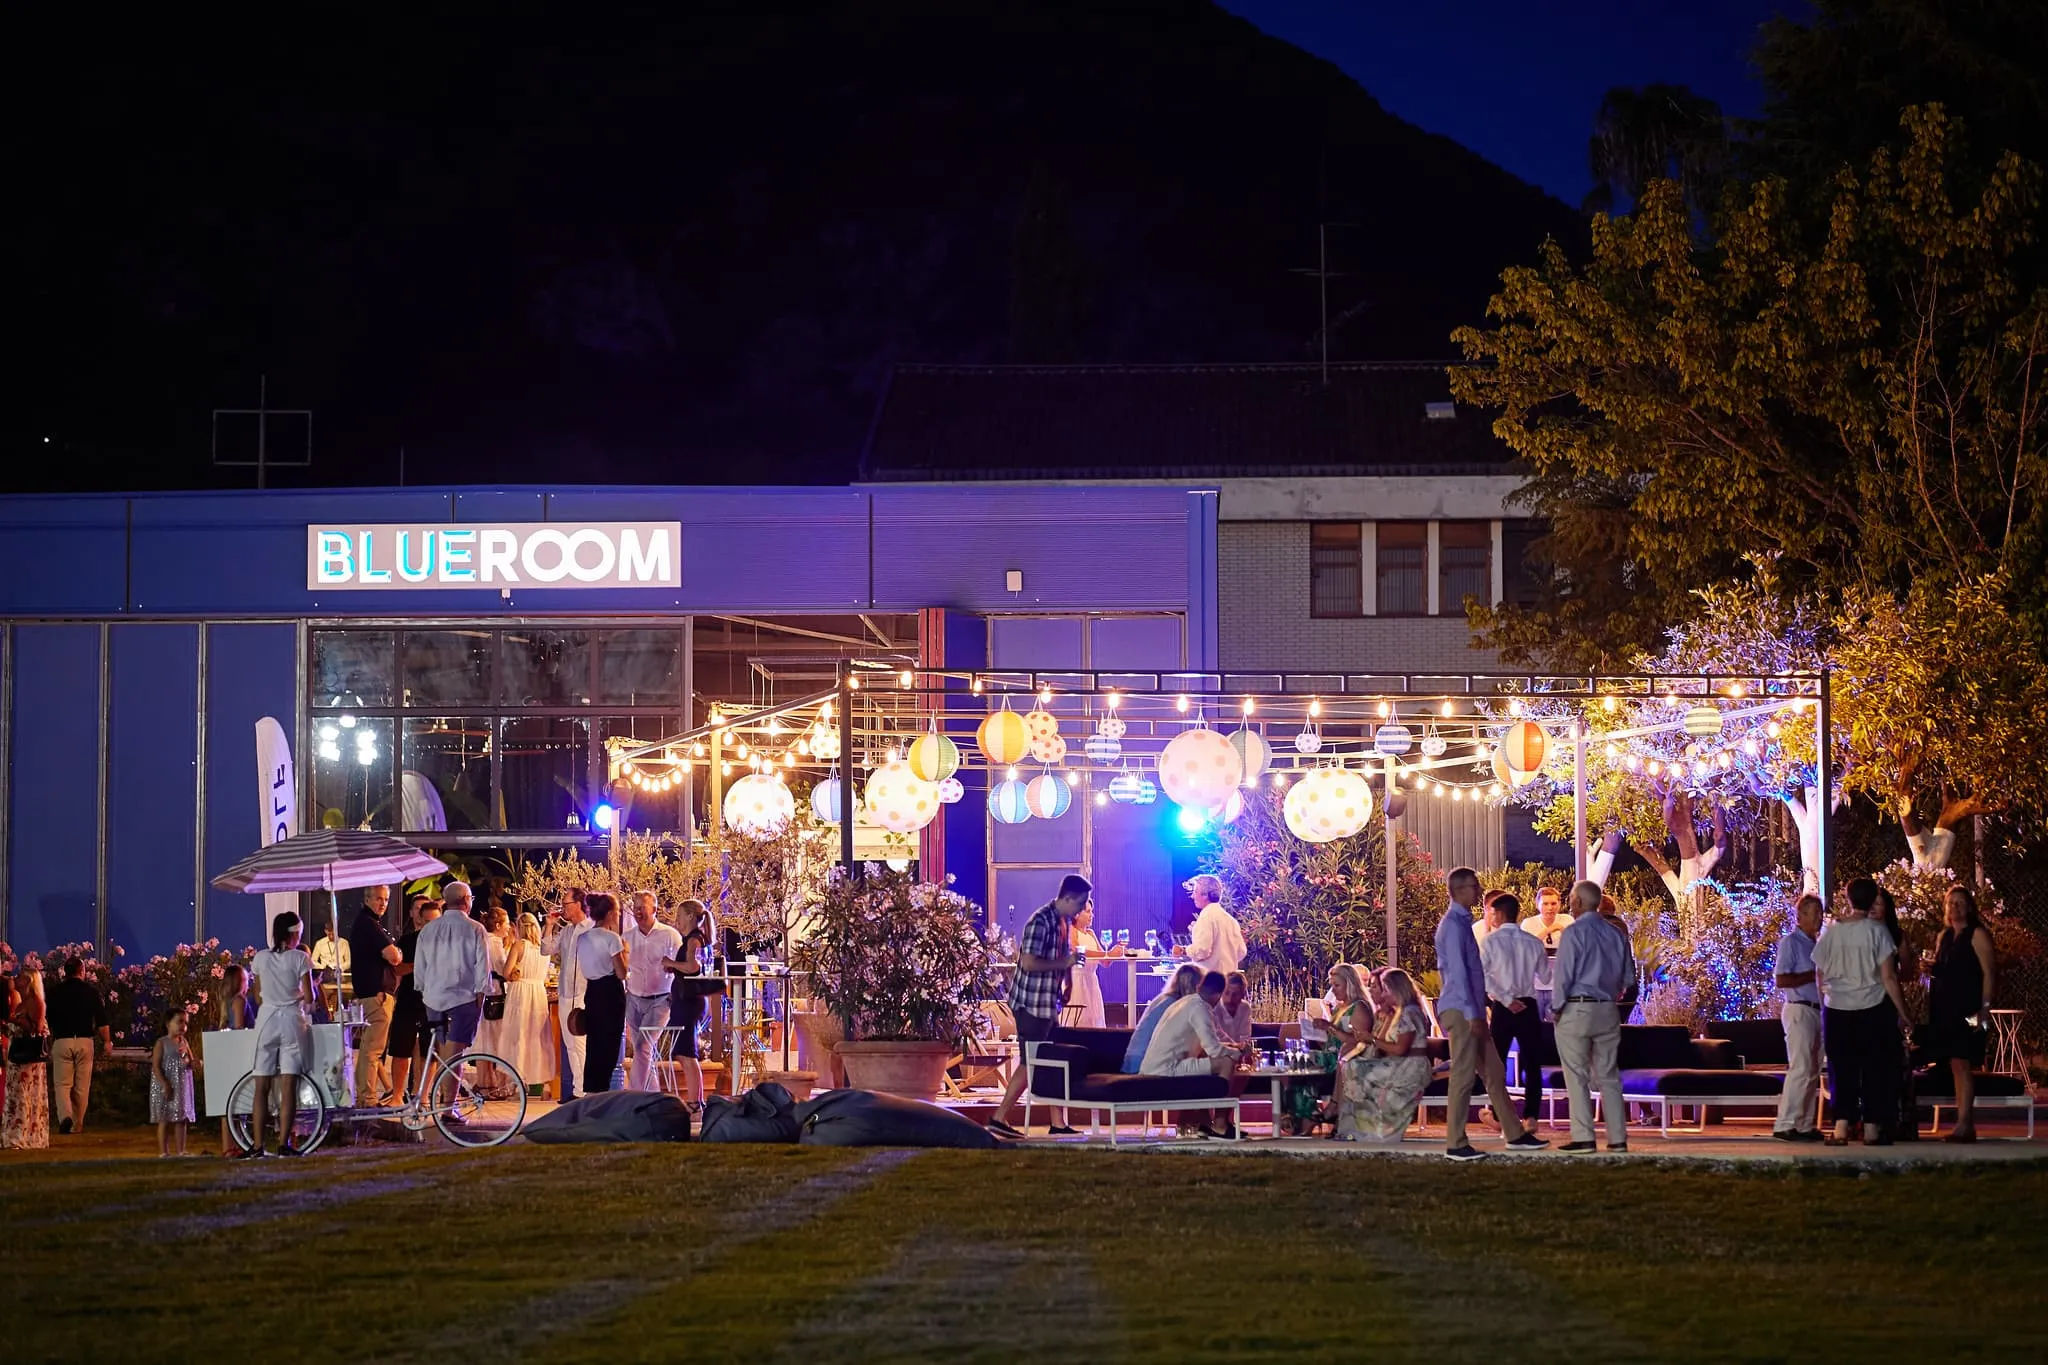 ACREW Crew awards itinerary |BBQ with drinks and live music at the Blue Room.